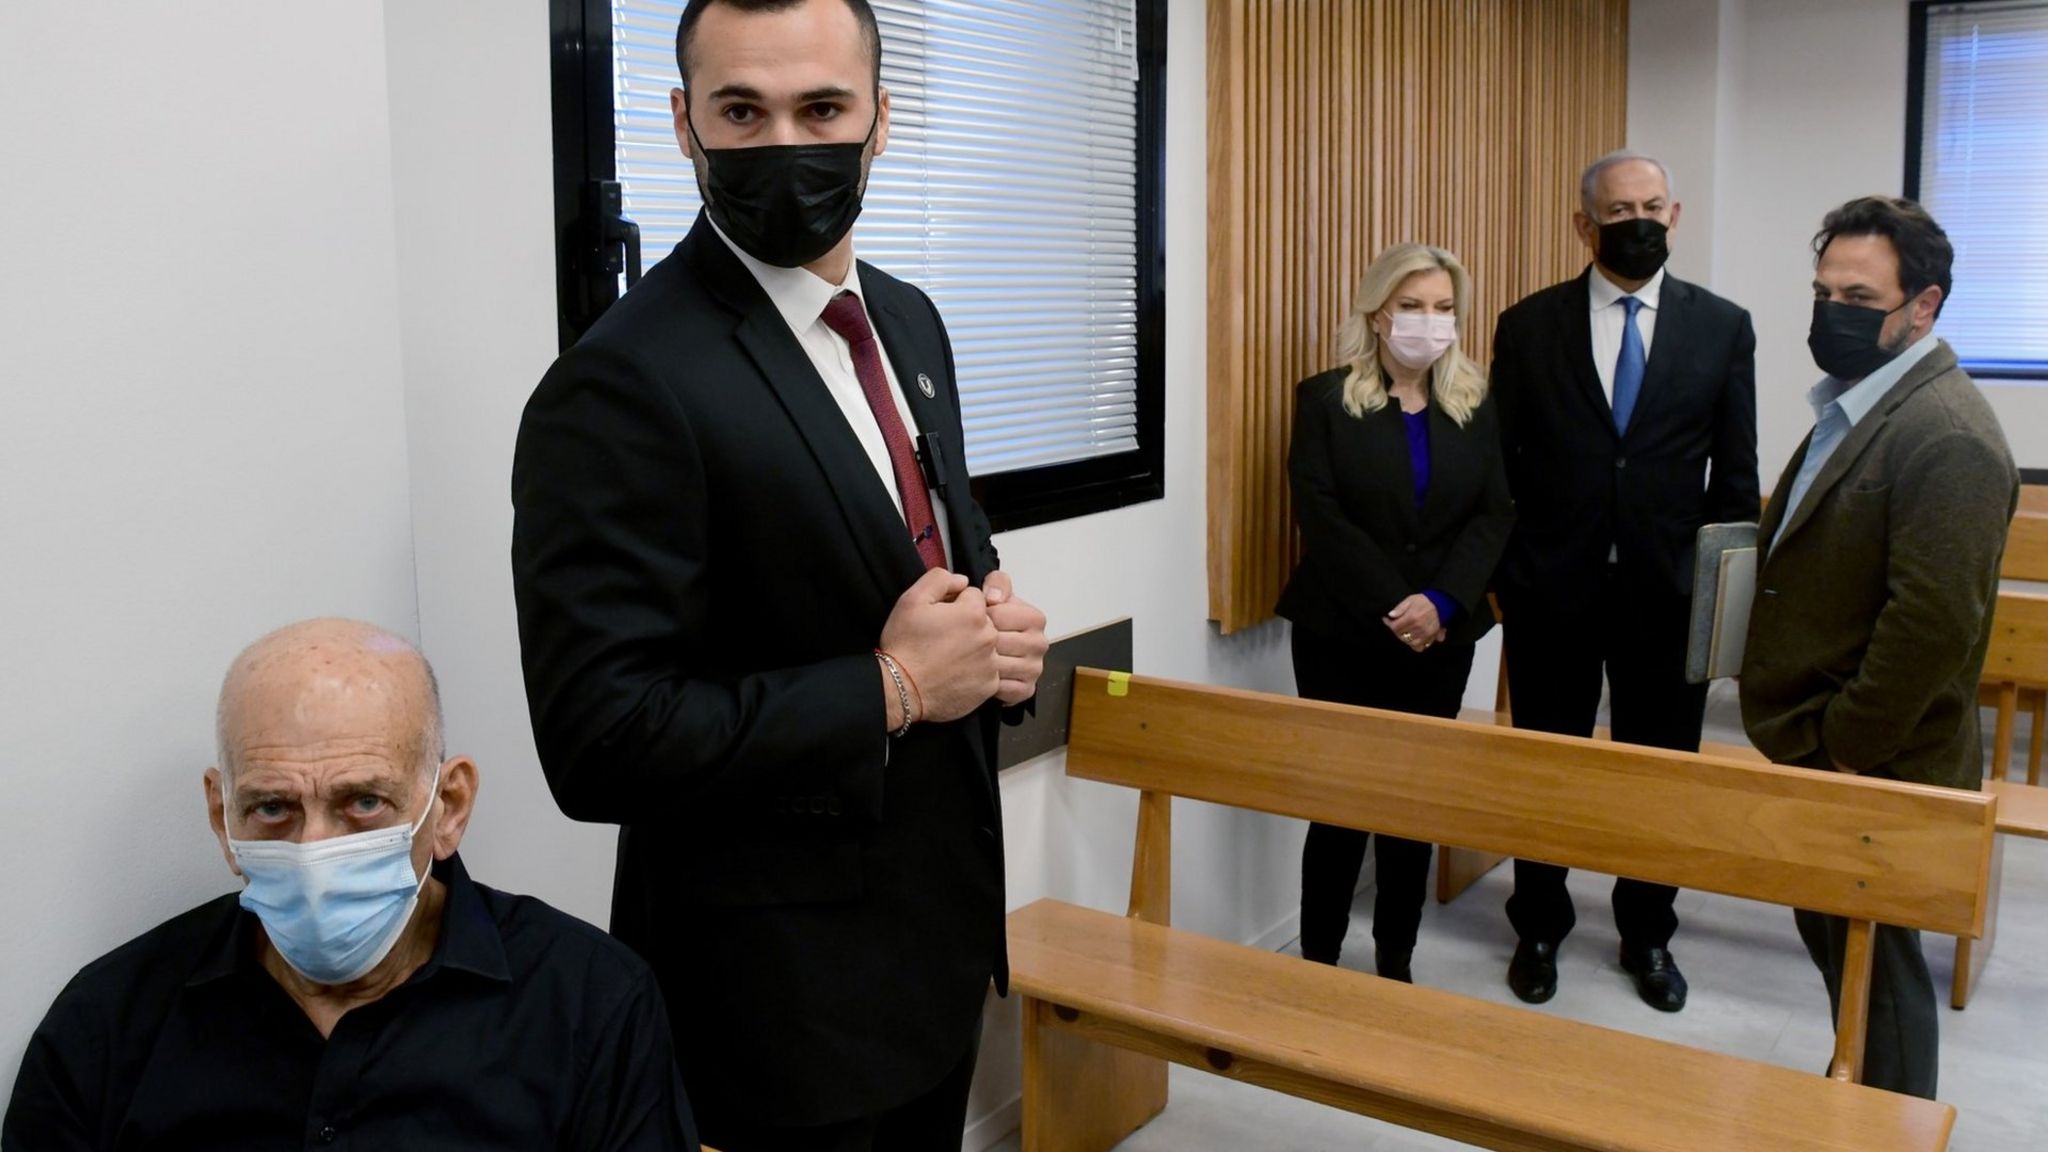 Ehud Olmert (L) sits inside the Tel Aviv Magistrate's Court, while Benjamin Netanyahu (2nd R) and his wife Sara (3rd R) stand behind him (10 January 2022)